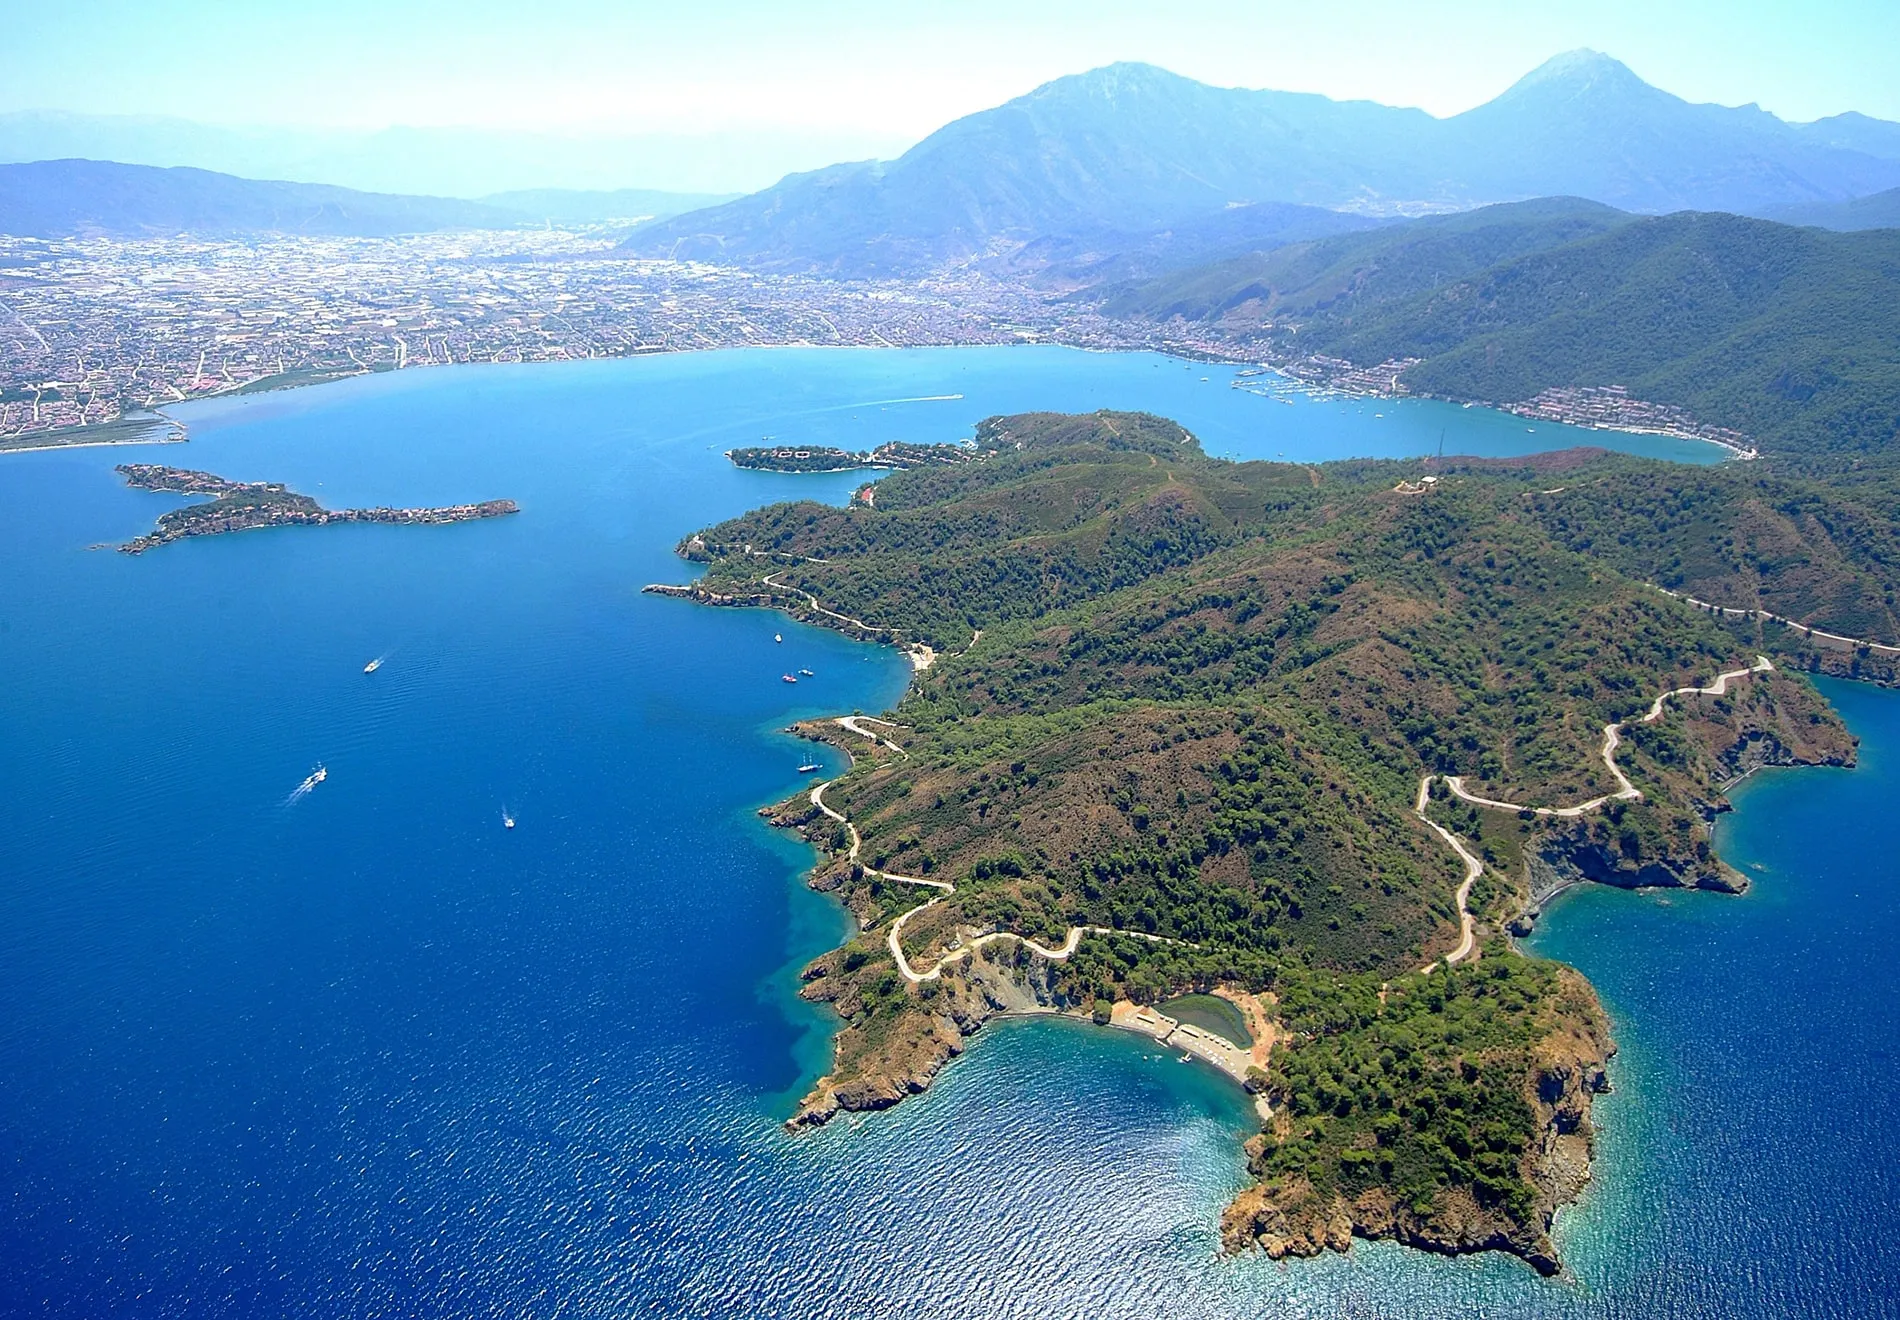 Opting for a gulet over a yacht ensures a more authentic experience, immersing travelers in Turkey's maritime tradition